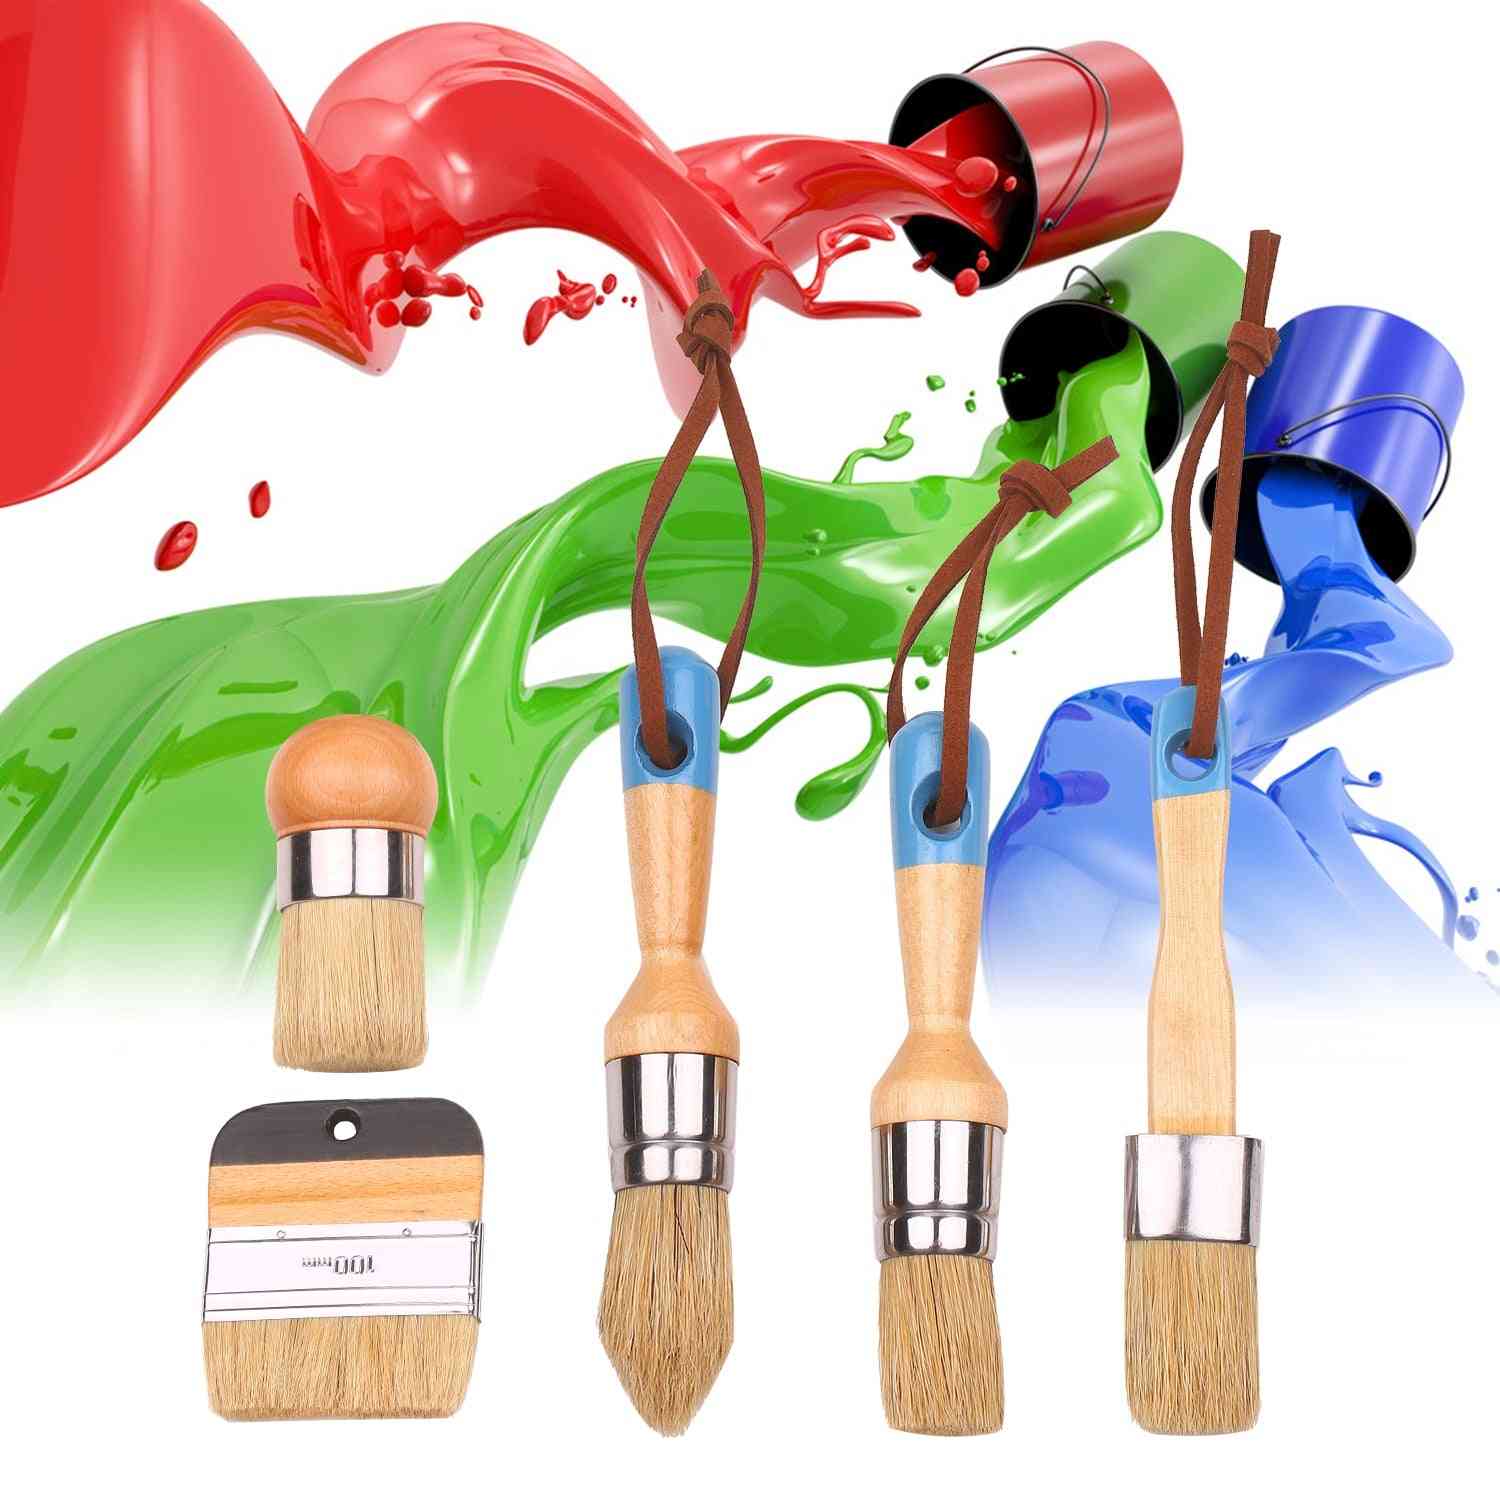 Round/pointed/flat Brush With Ergonomic Handle - Painting And Waxing Tool